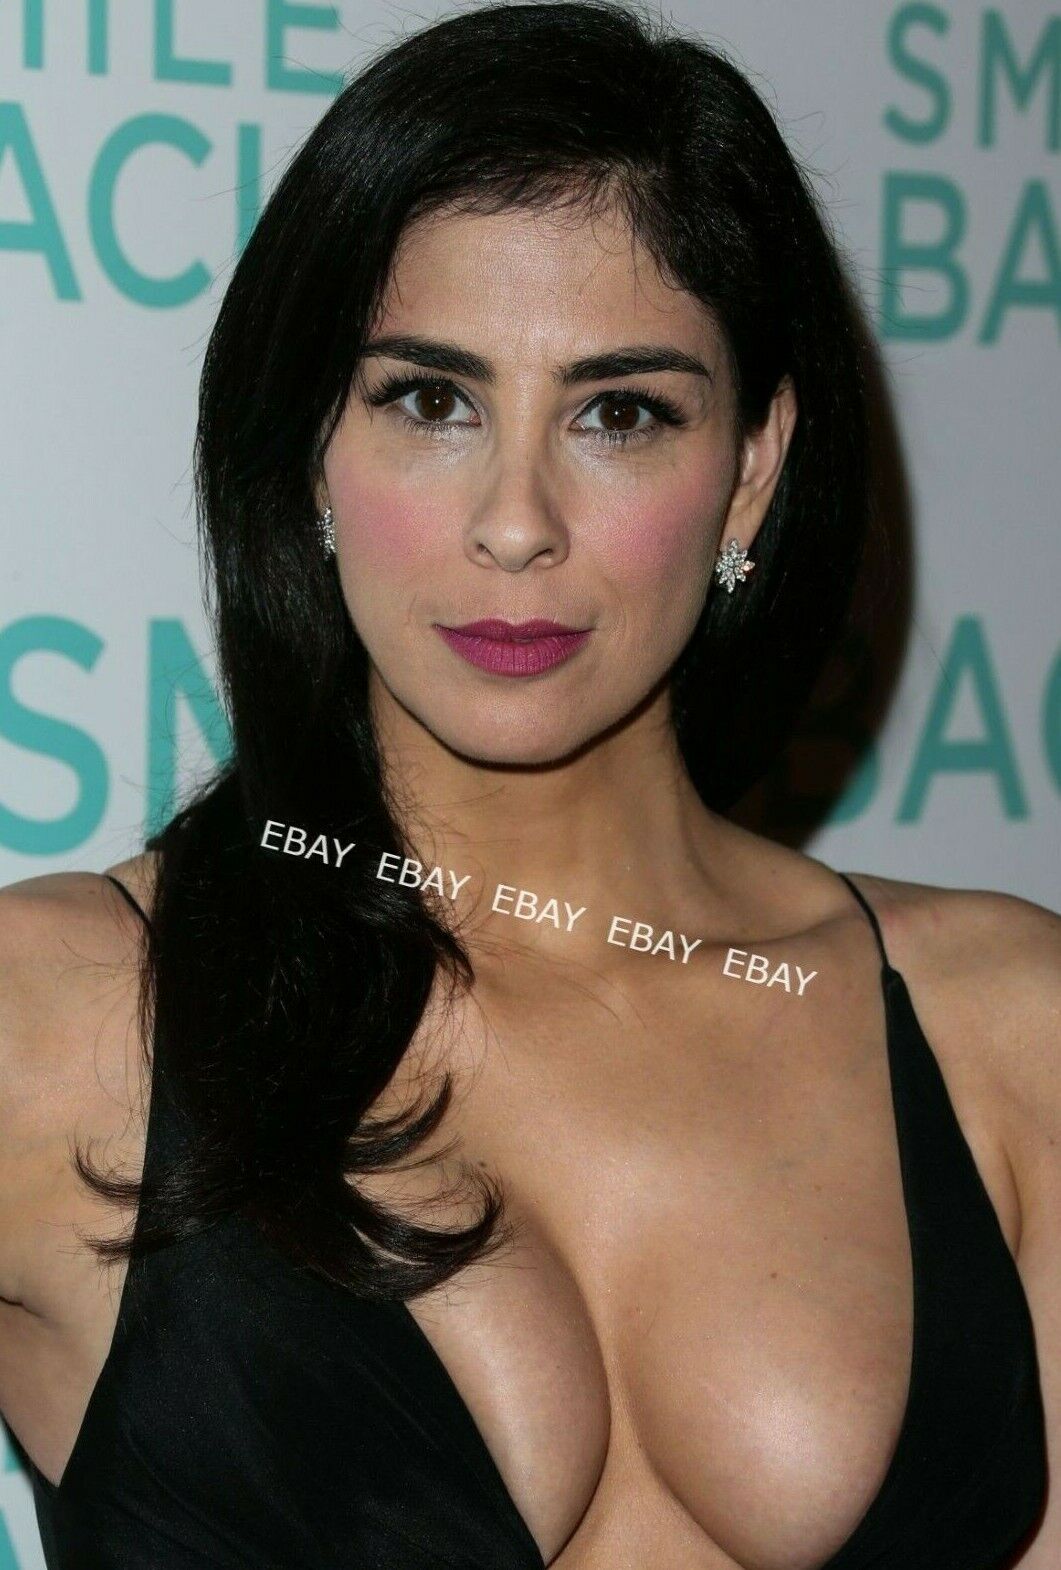 SARAH SILVERMAN sexy & busty ⭐ 4x6 GLOSSY PHOTO #1 ⭐ comedian actress picture